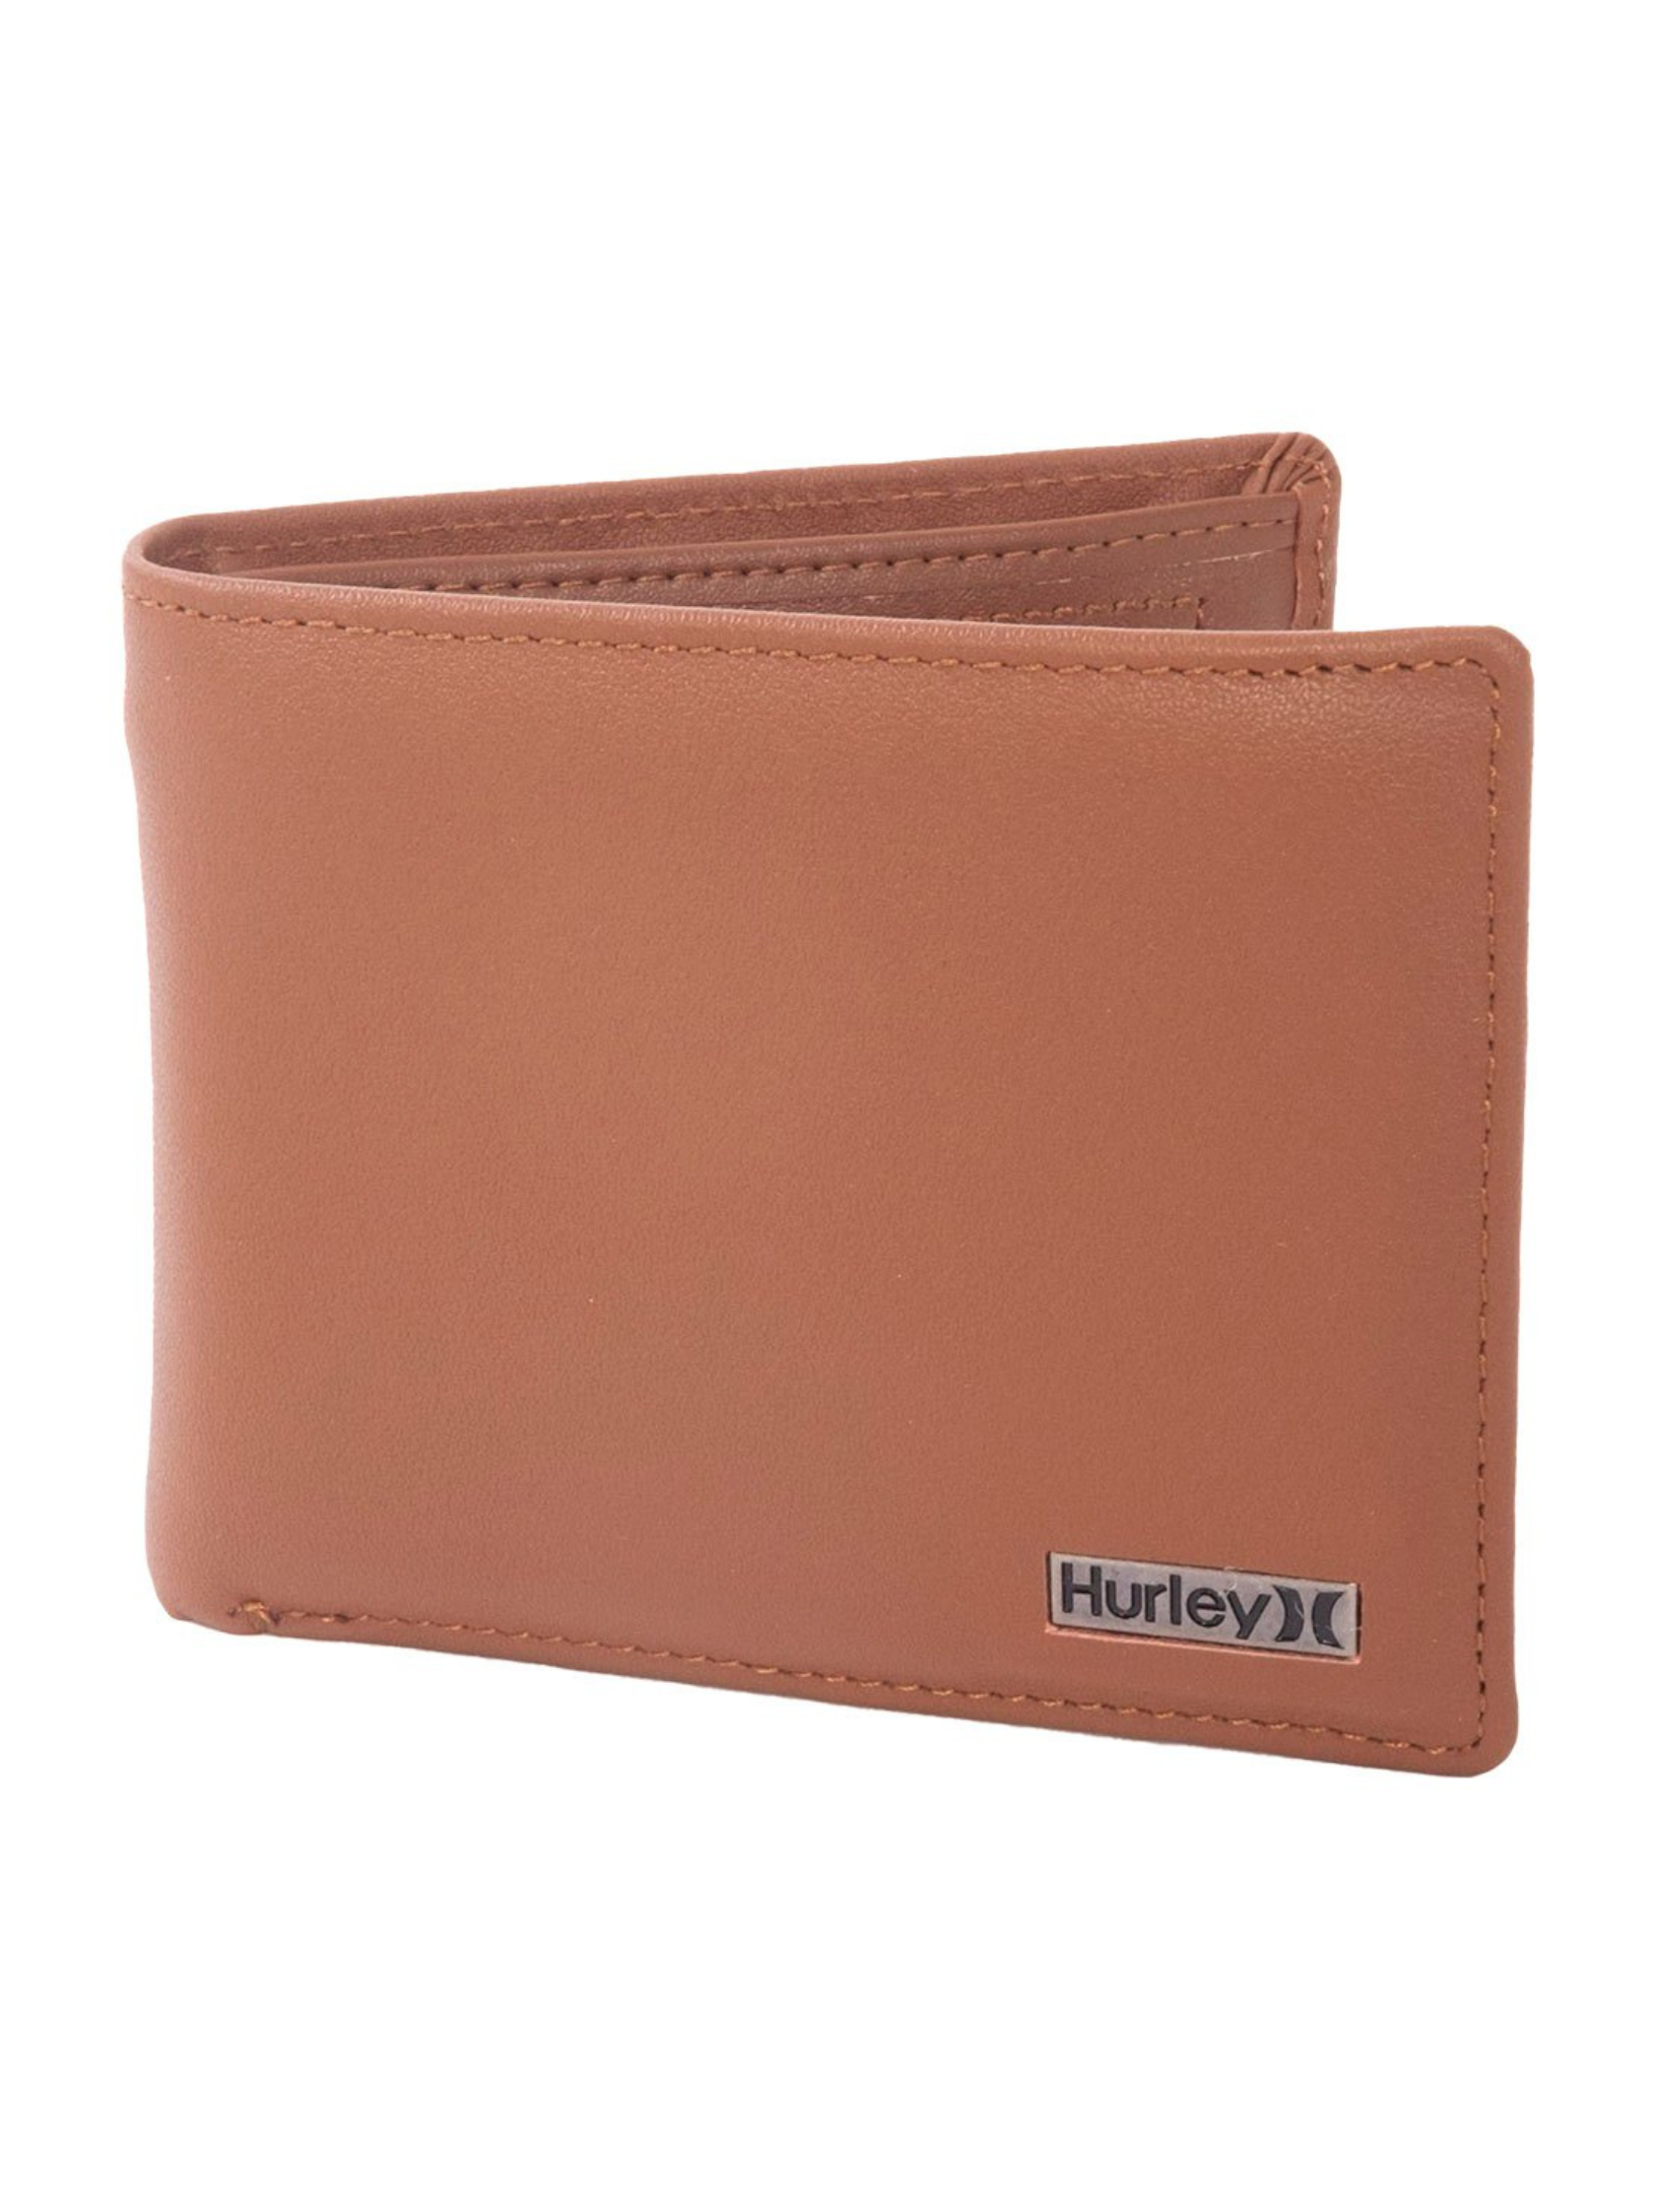 Hurley Cartera One & Only Leather Tan | Carteras | surfdevils.com